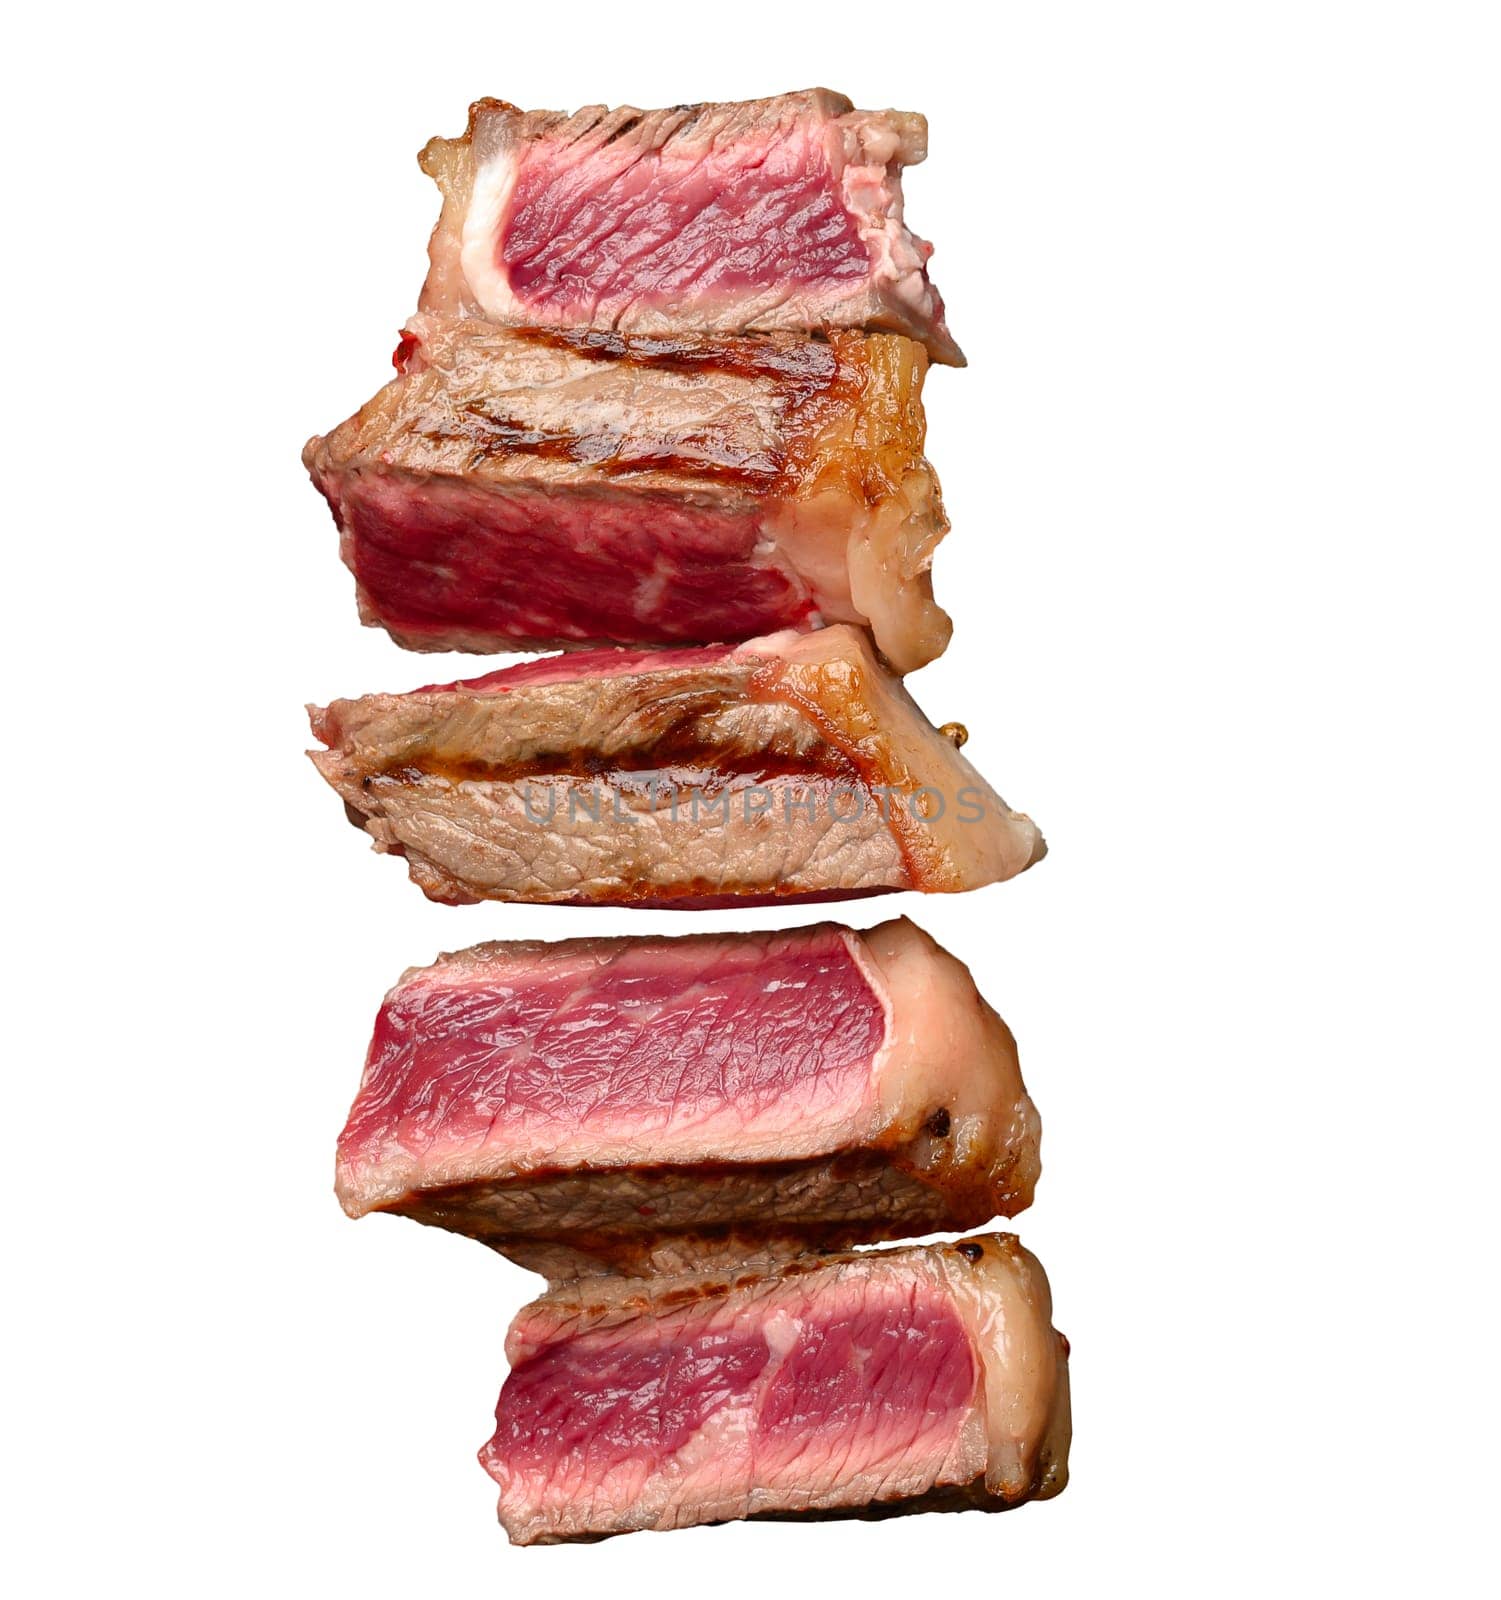 Sliced fried beef steak New York on a isolated background, degree of doneness rare by ndanko